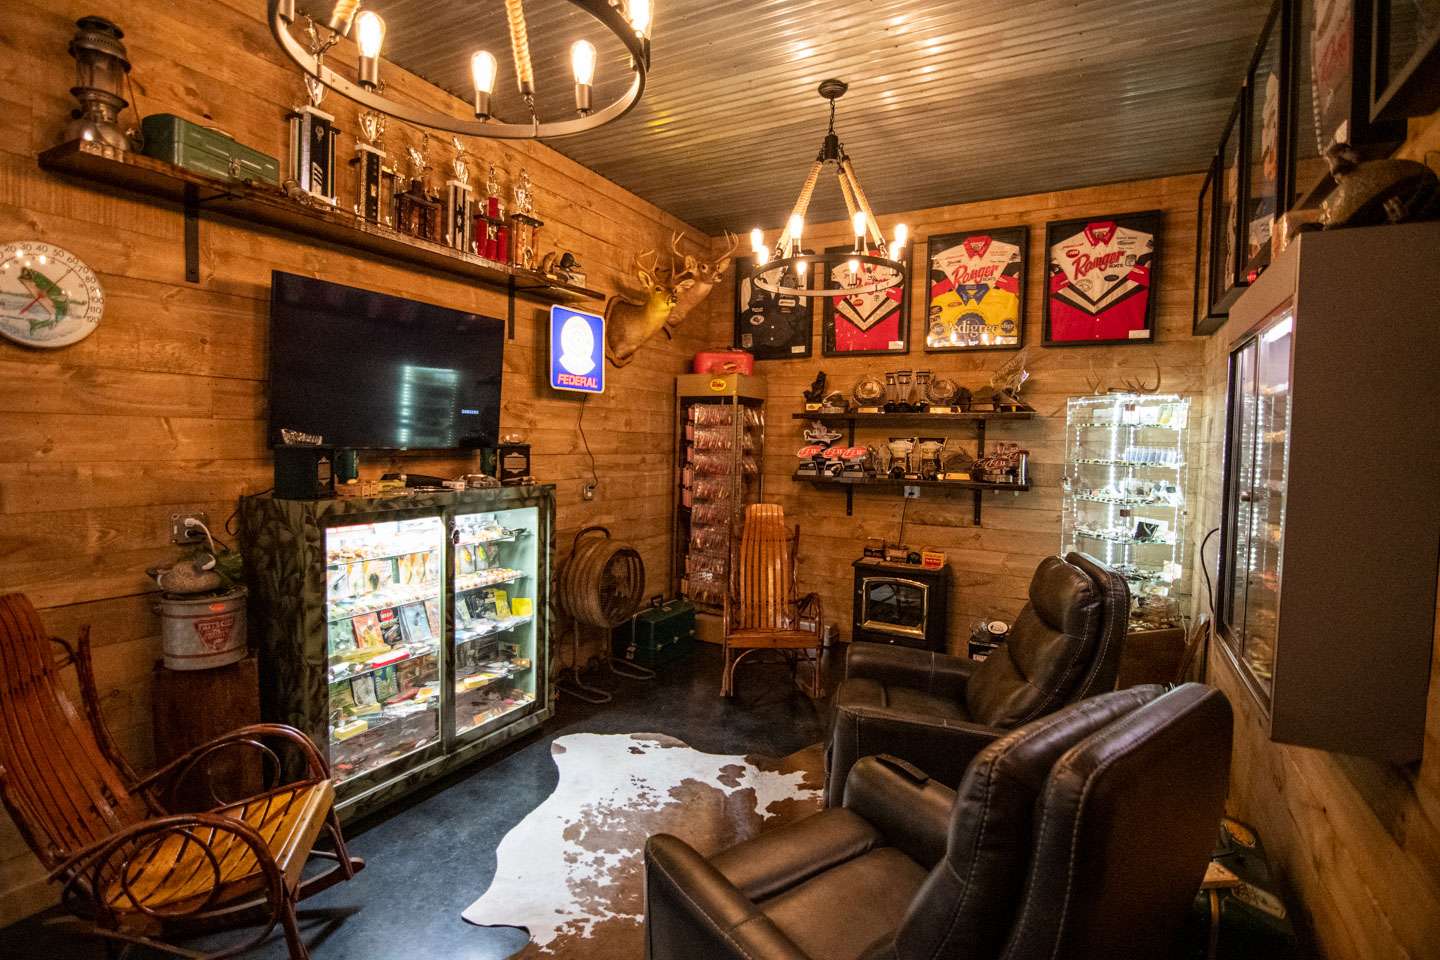 Take a couple of final looks at the man cave of Todd Auten. 